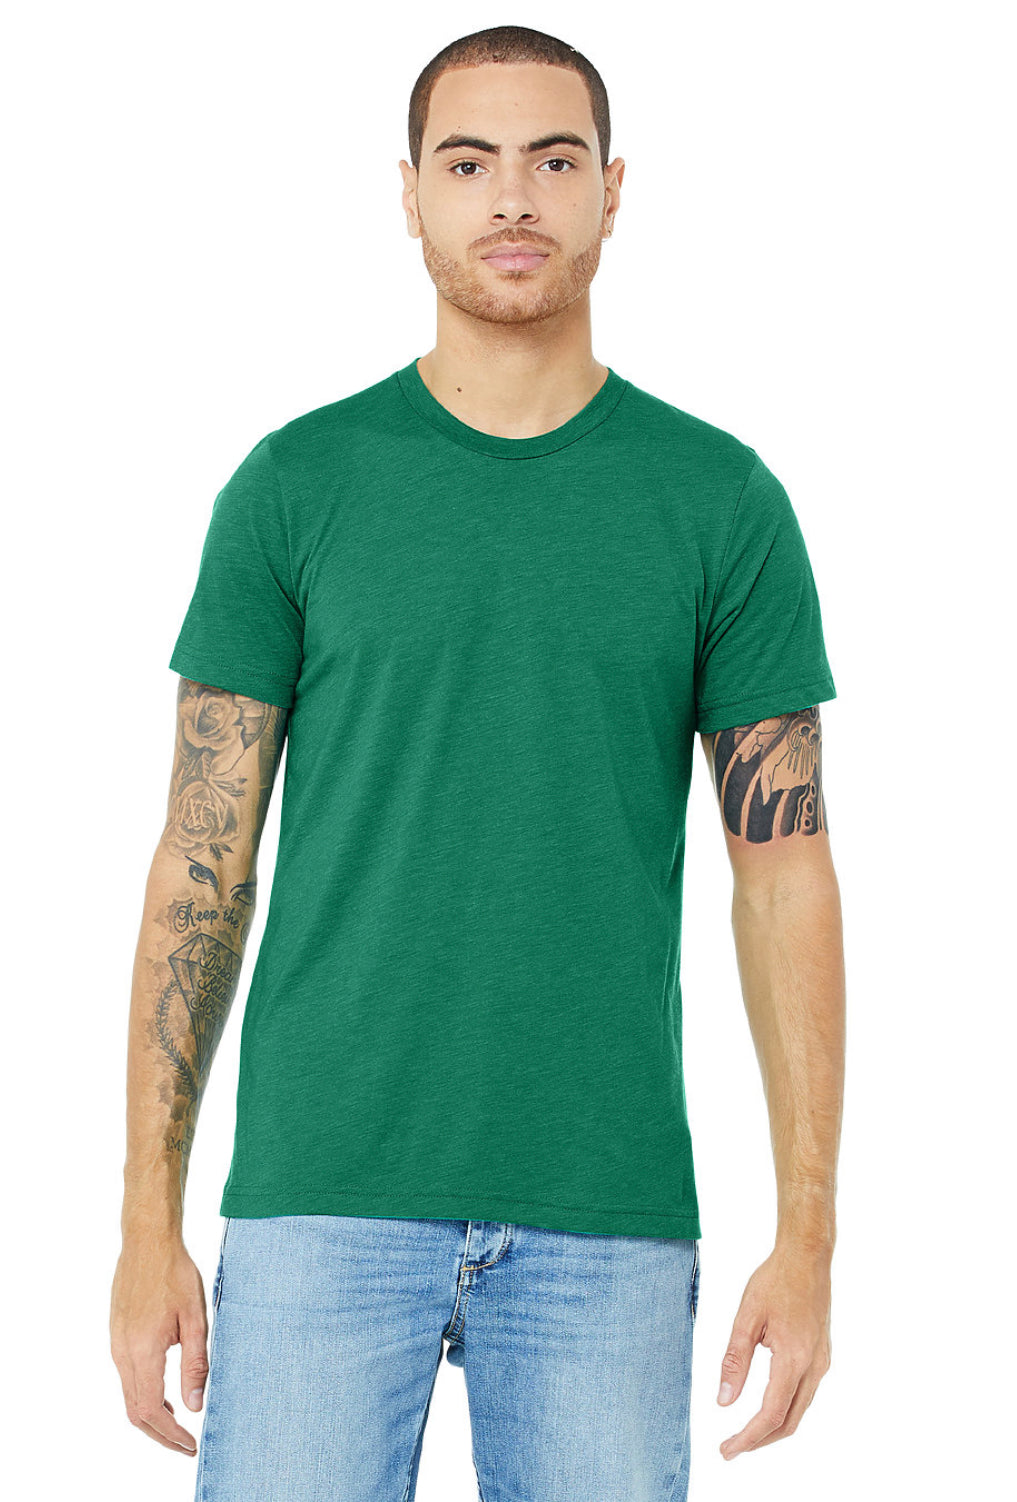 Green – Pacific Tee, Bella+Canvas - fly-chic21